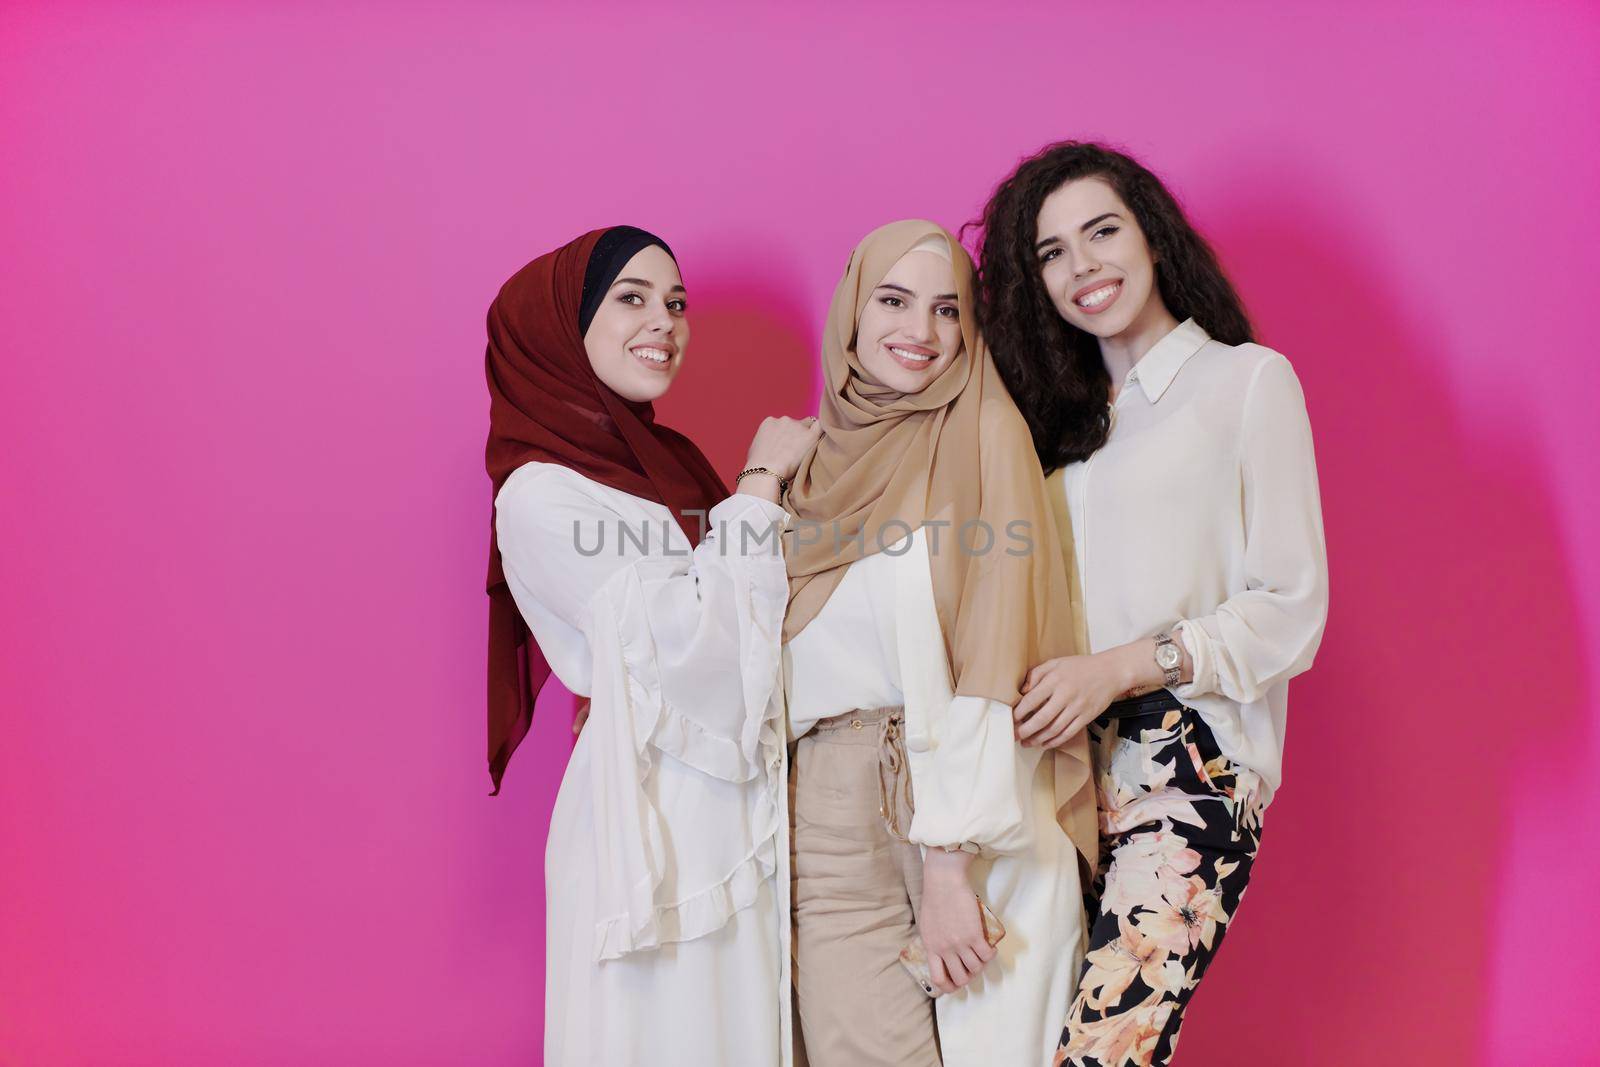 group portrait of beautiful muslim women two of them in fashionable dress with hijab isolated on pink background representing modern islam fashion and ramadan kareem concept